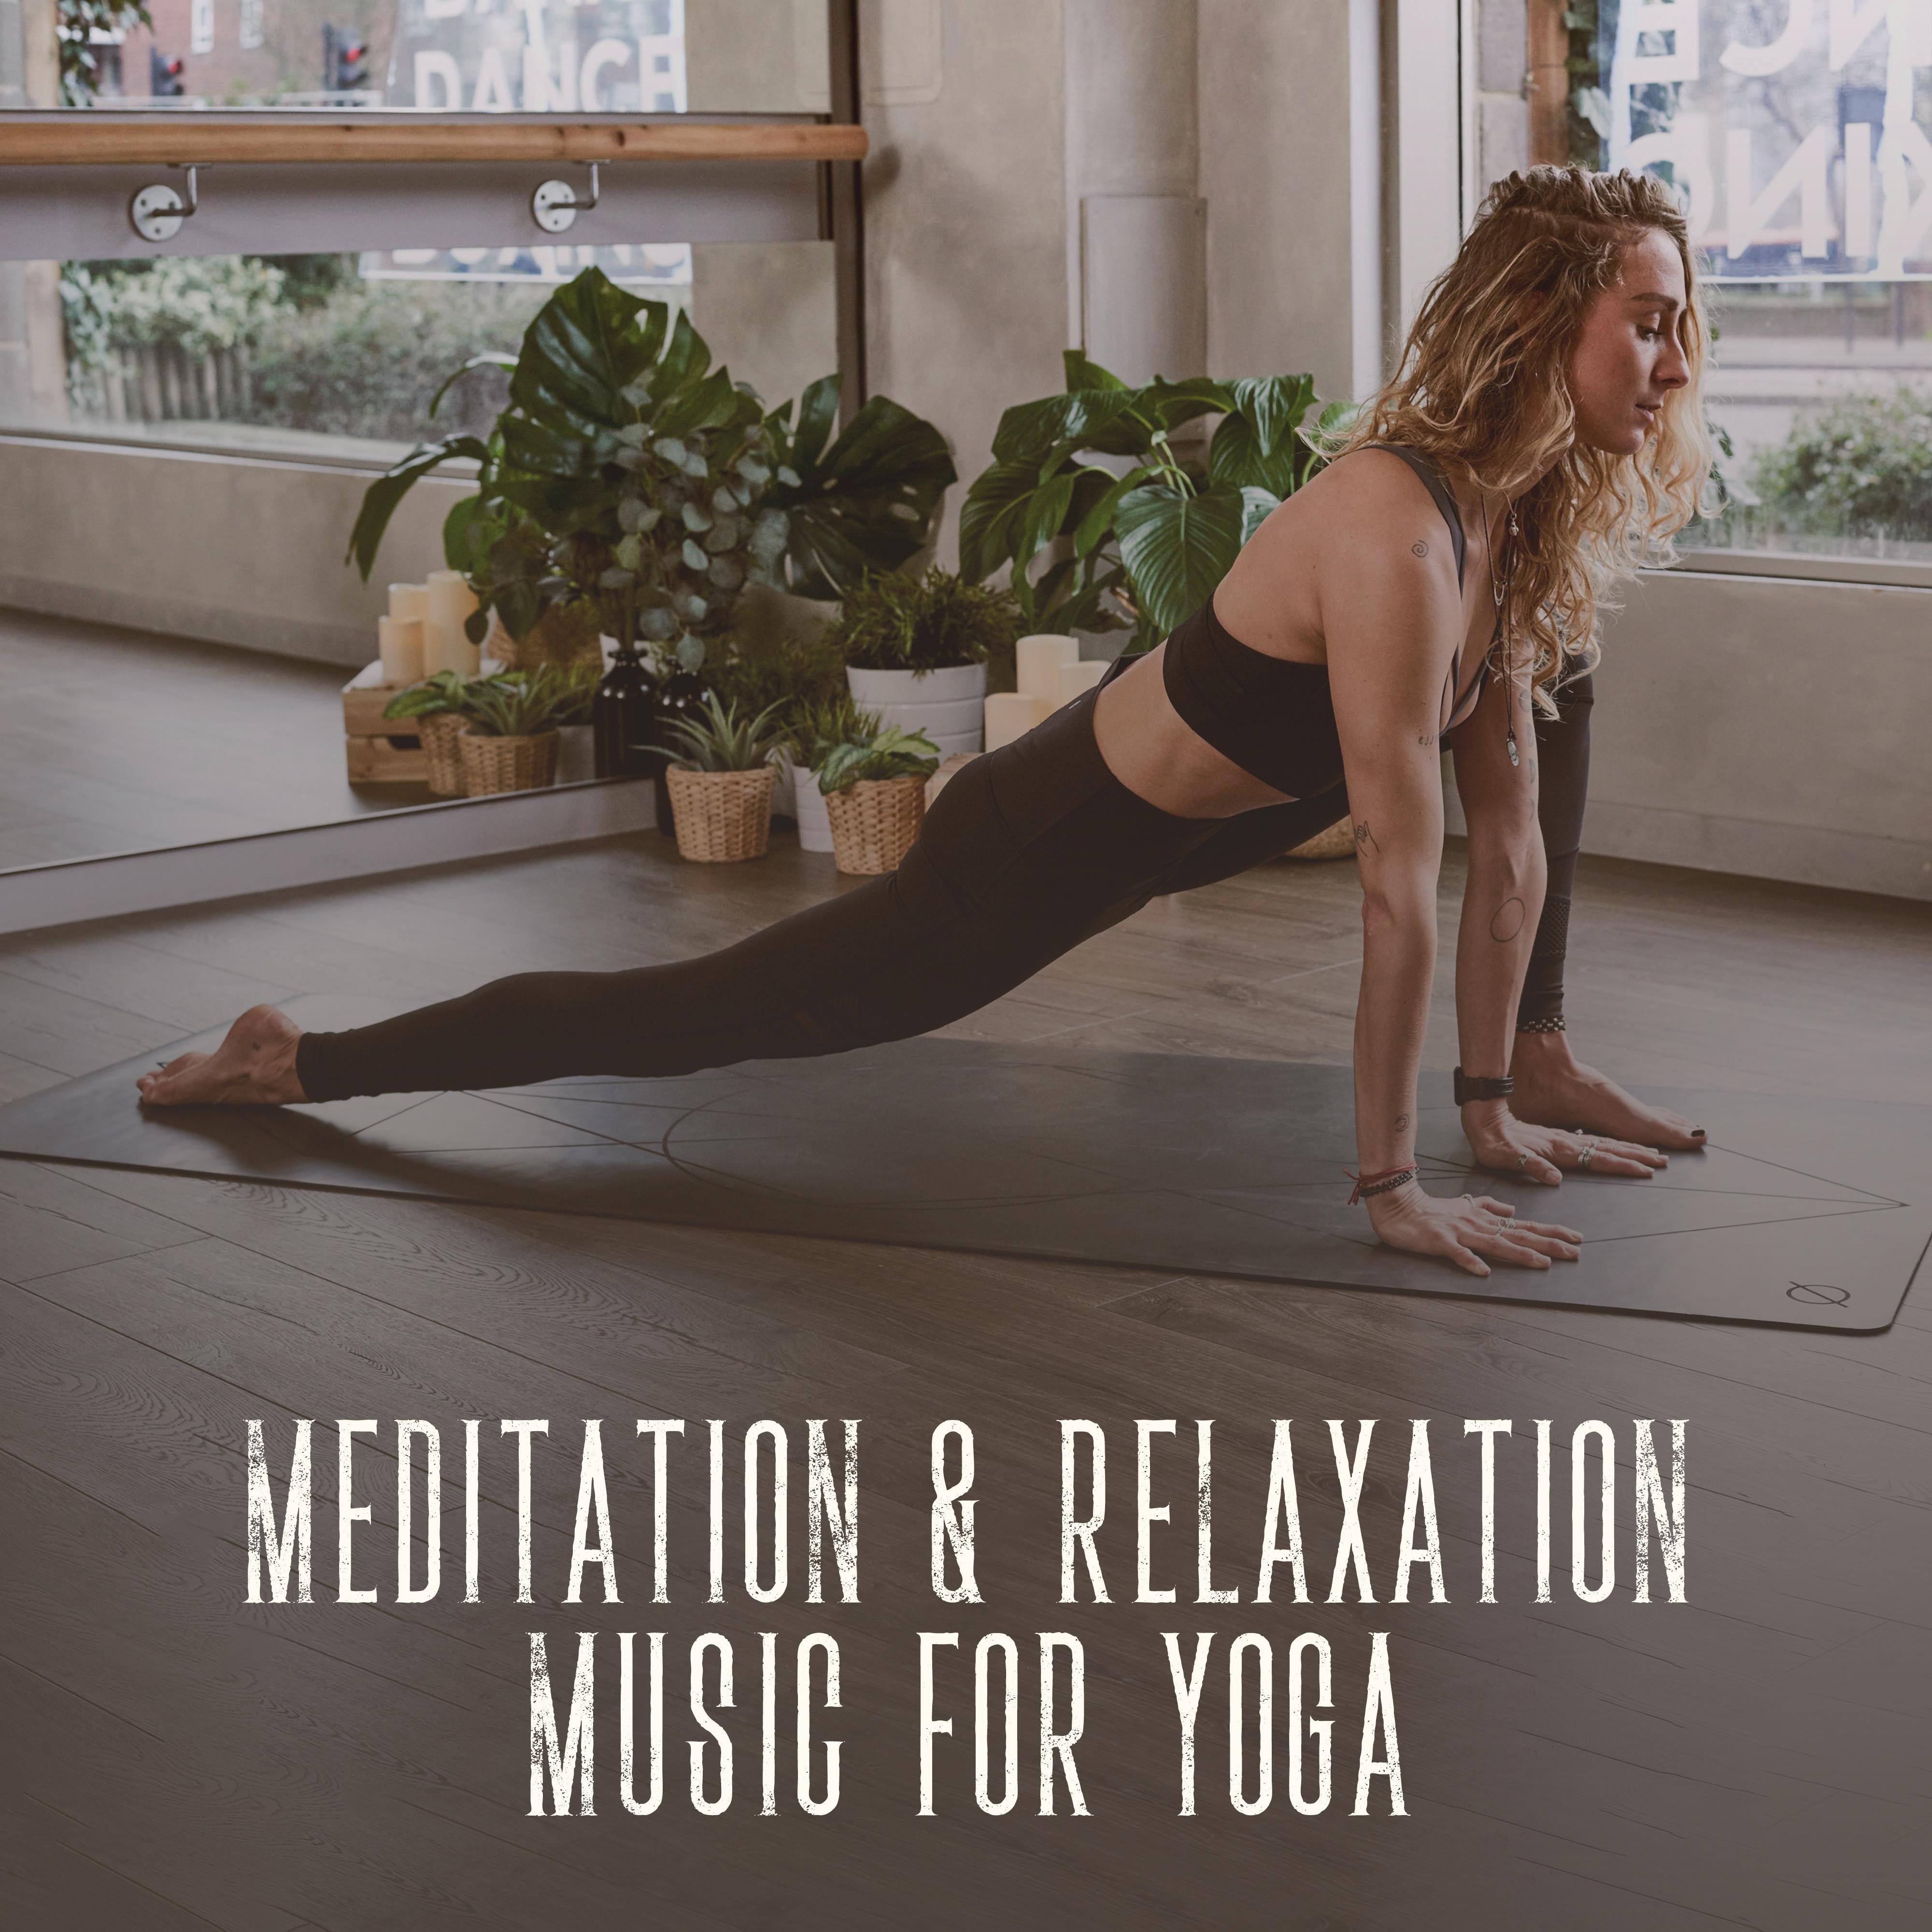 Meditation & Relaxation Music for Yoga: Meditation Music Zone, Stress Relief, Pure Mind, 15 Soothing Sounds for Yoga Training, Sacral Chakra Meditation